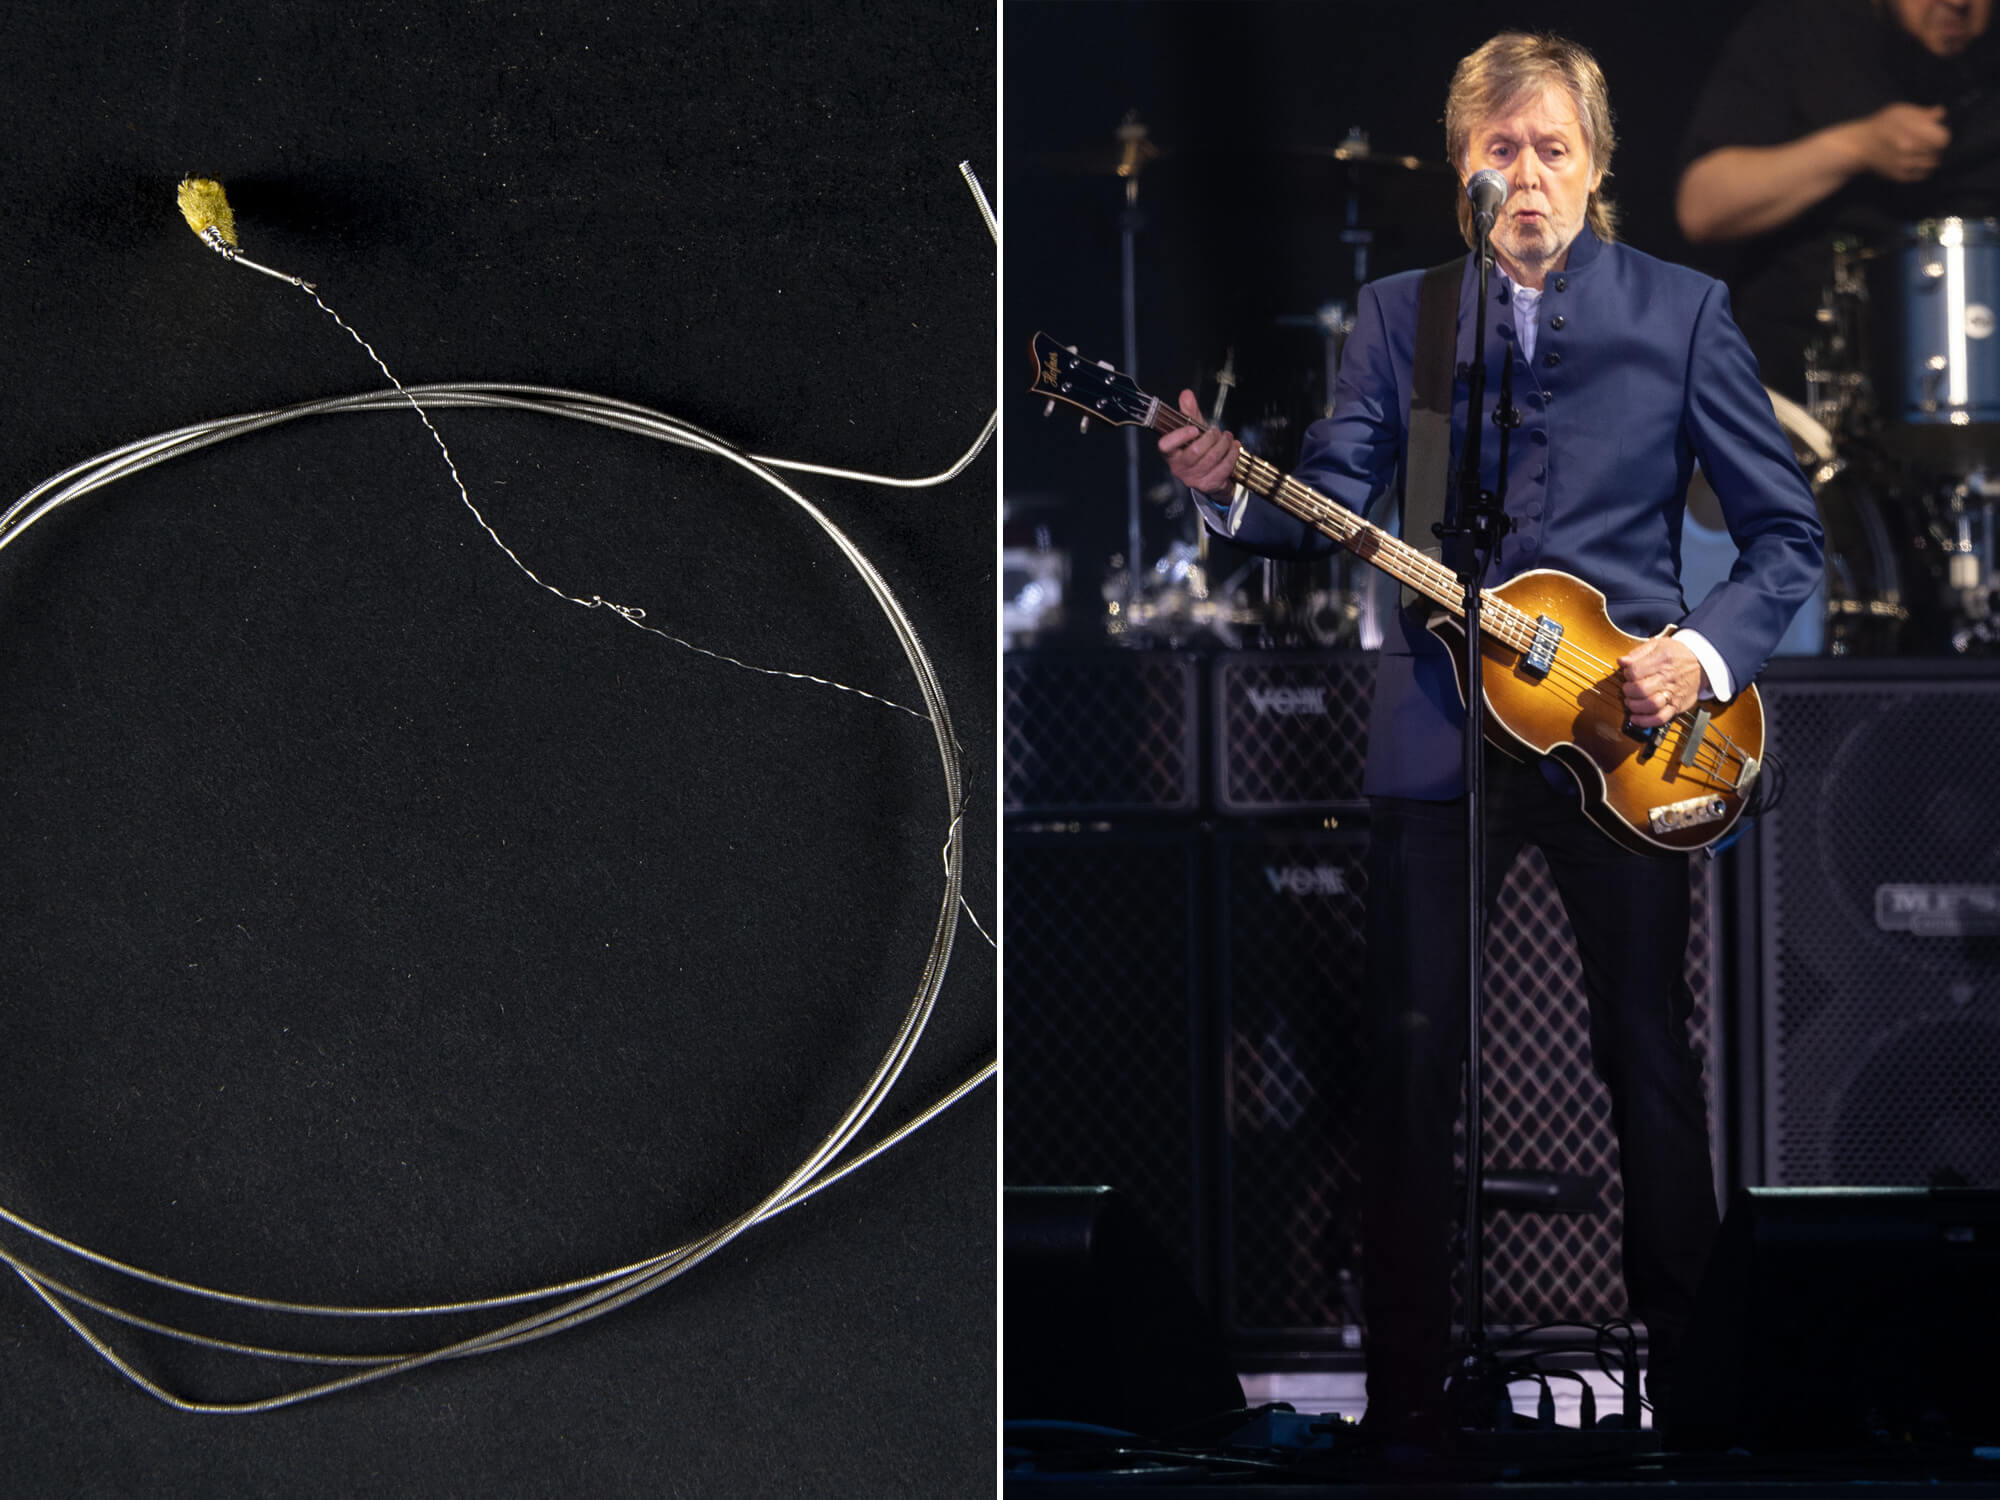 Epiphone string and Paul McCartney performing live split image